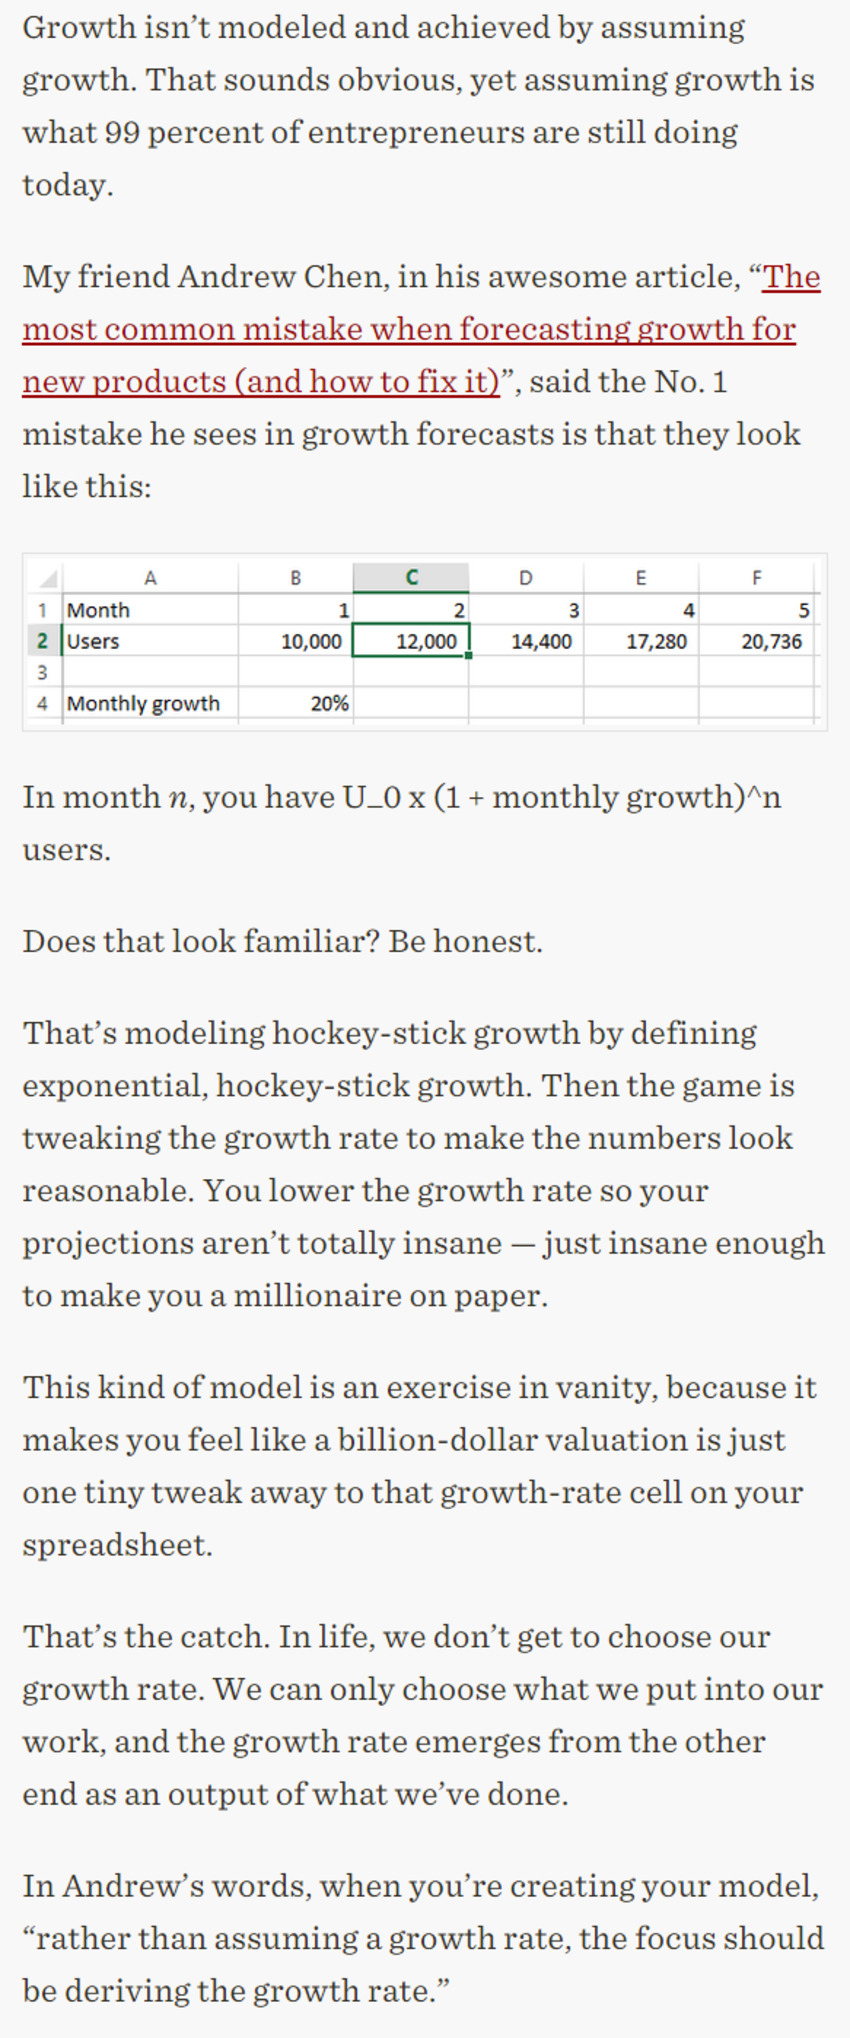 You’re Still Modeling Growth Incorrectly - TechCrunch | The MarTech Digest | Scoop.it